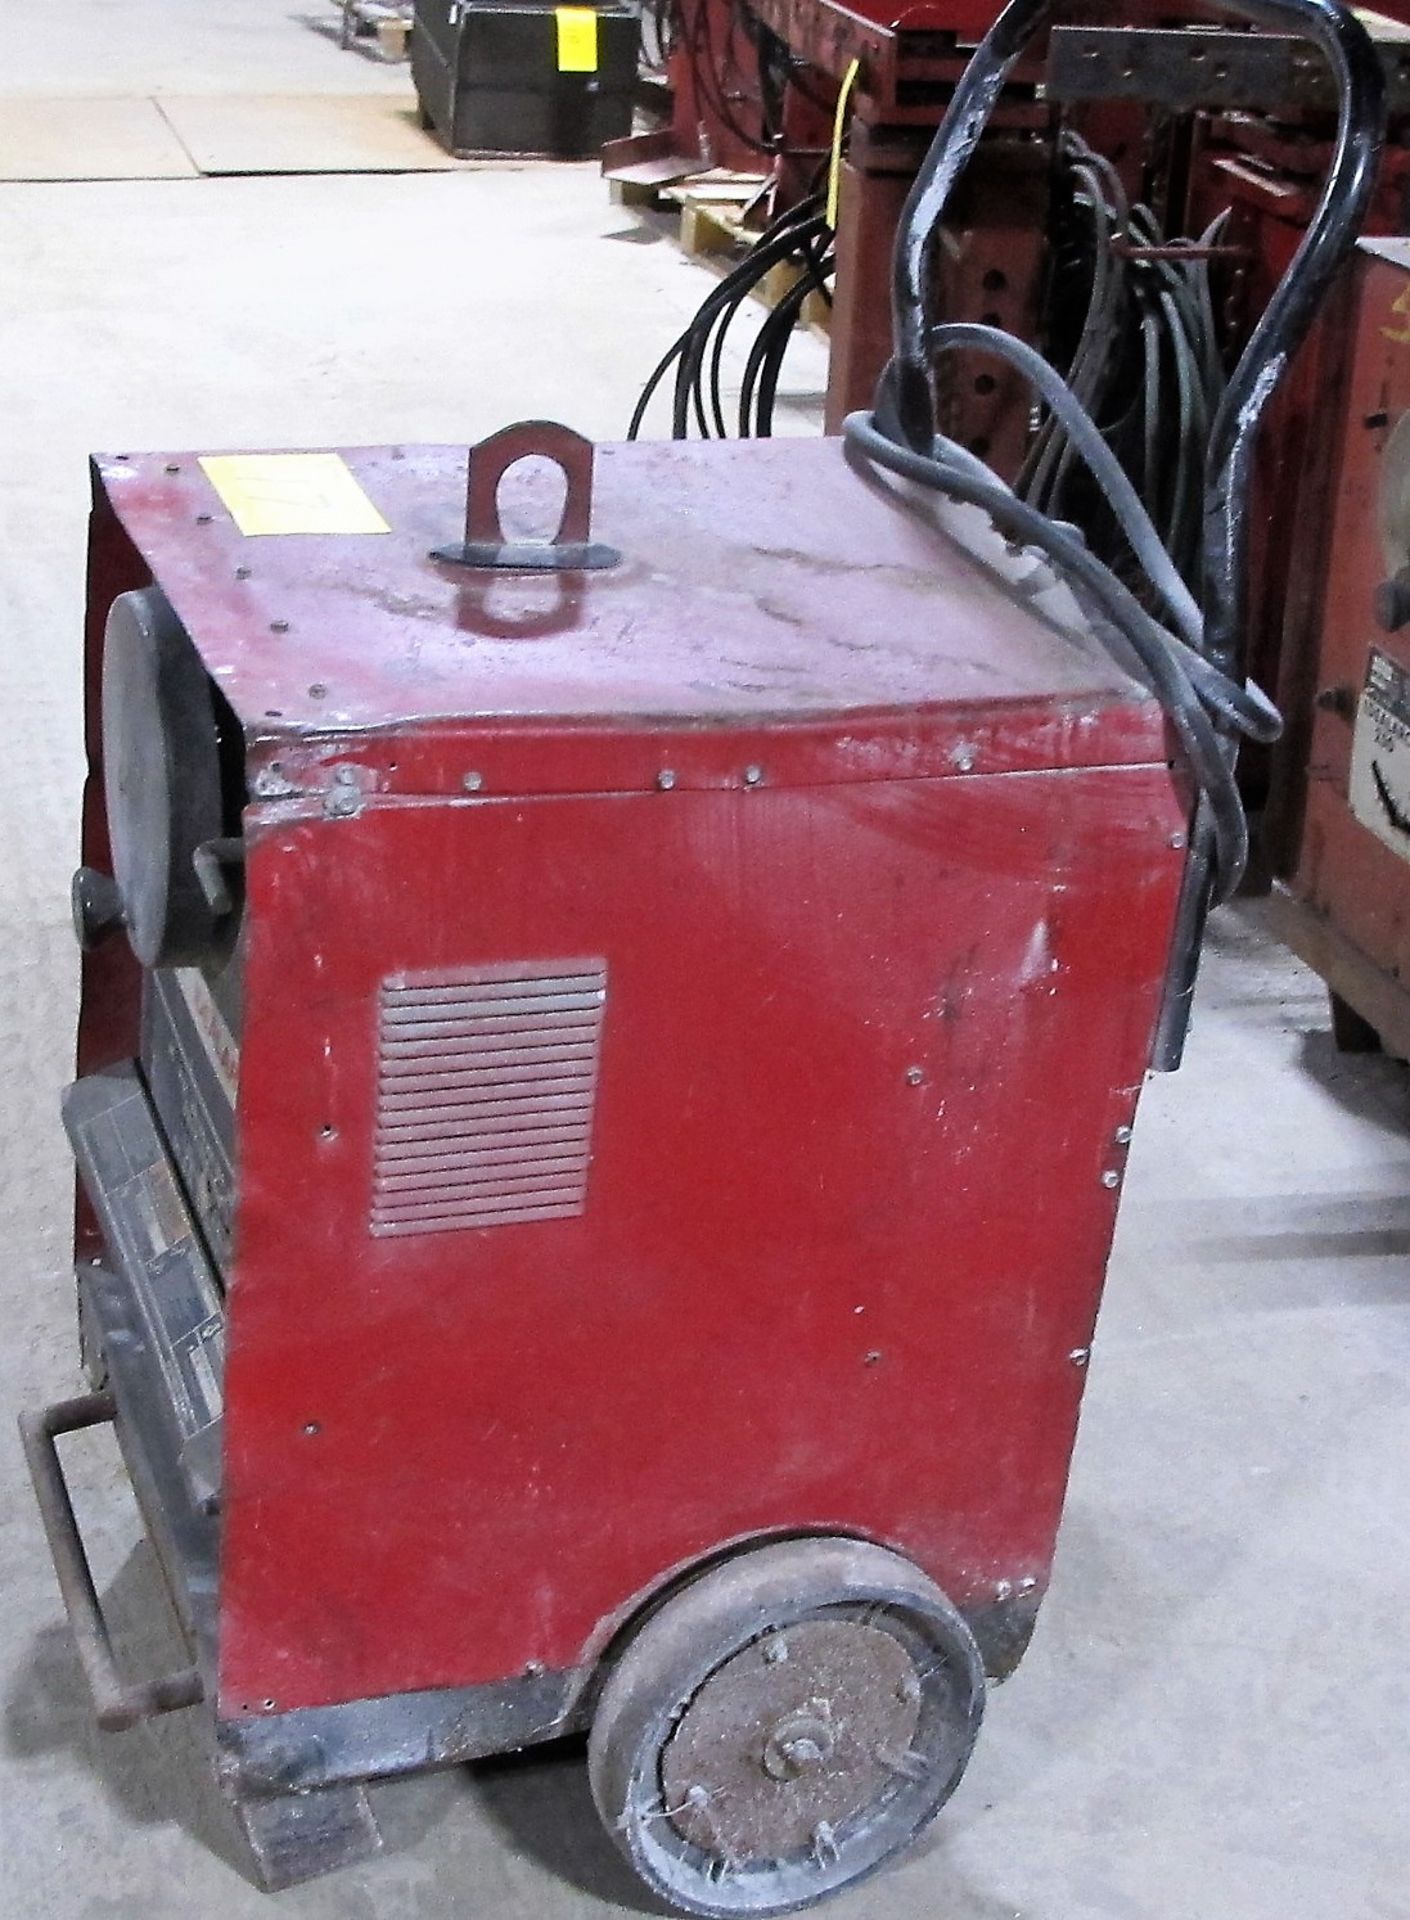 LINCOLN ELECTRIC IDEAL ARC 250 WELDER ON CART W/POWER CABLE, S/N 1951015 - Image 3 of 4